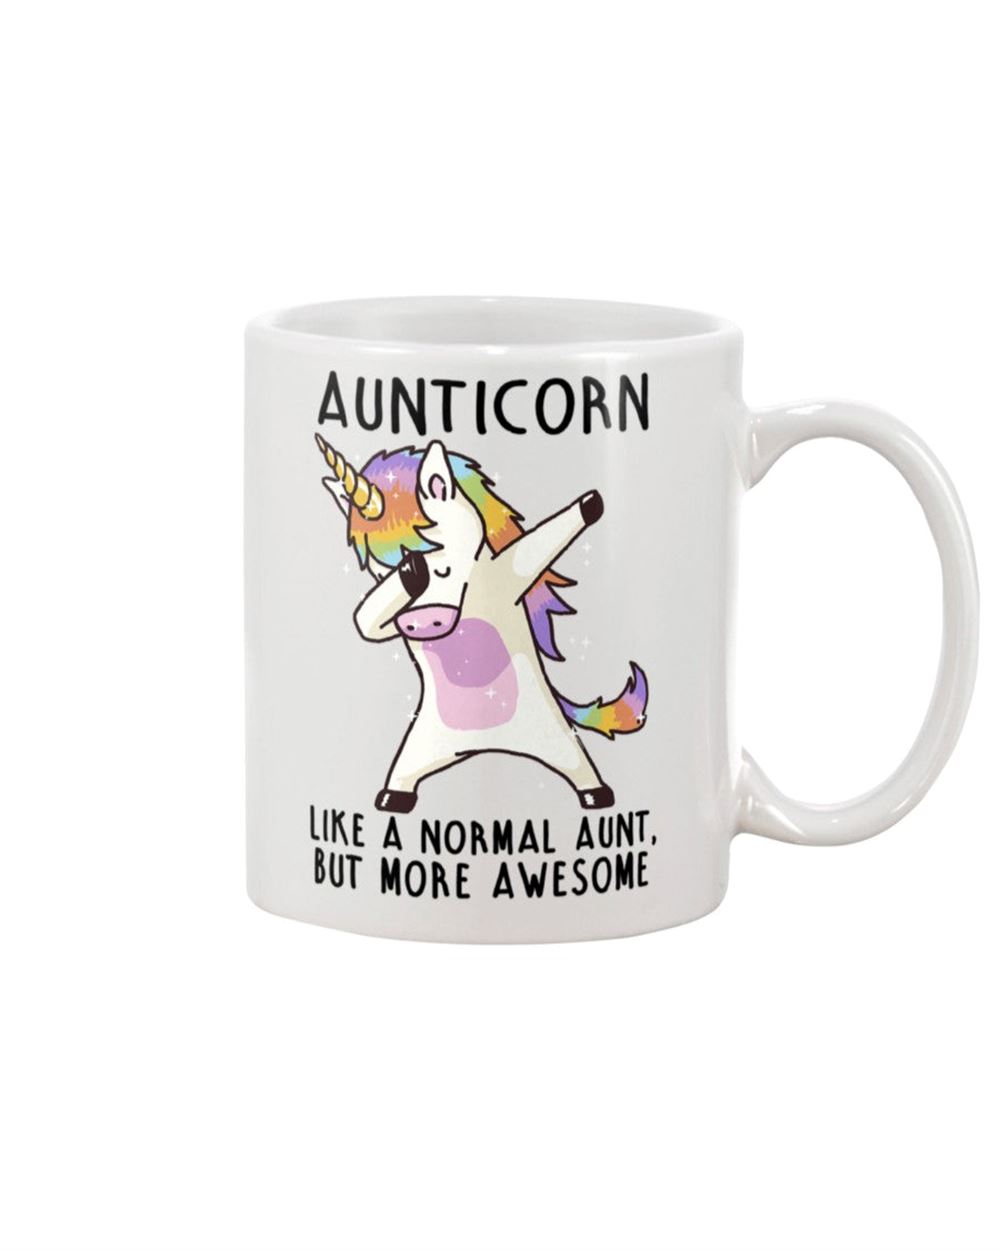 Aunticorn Like A Normal Aunt But More Awesome